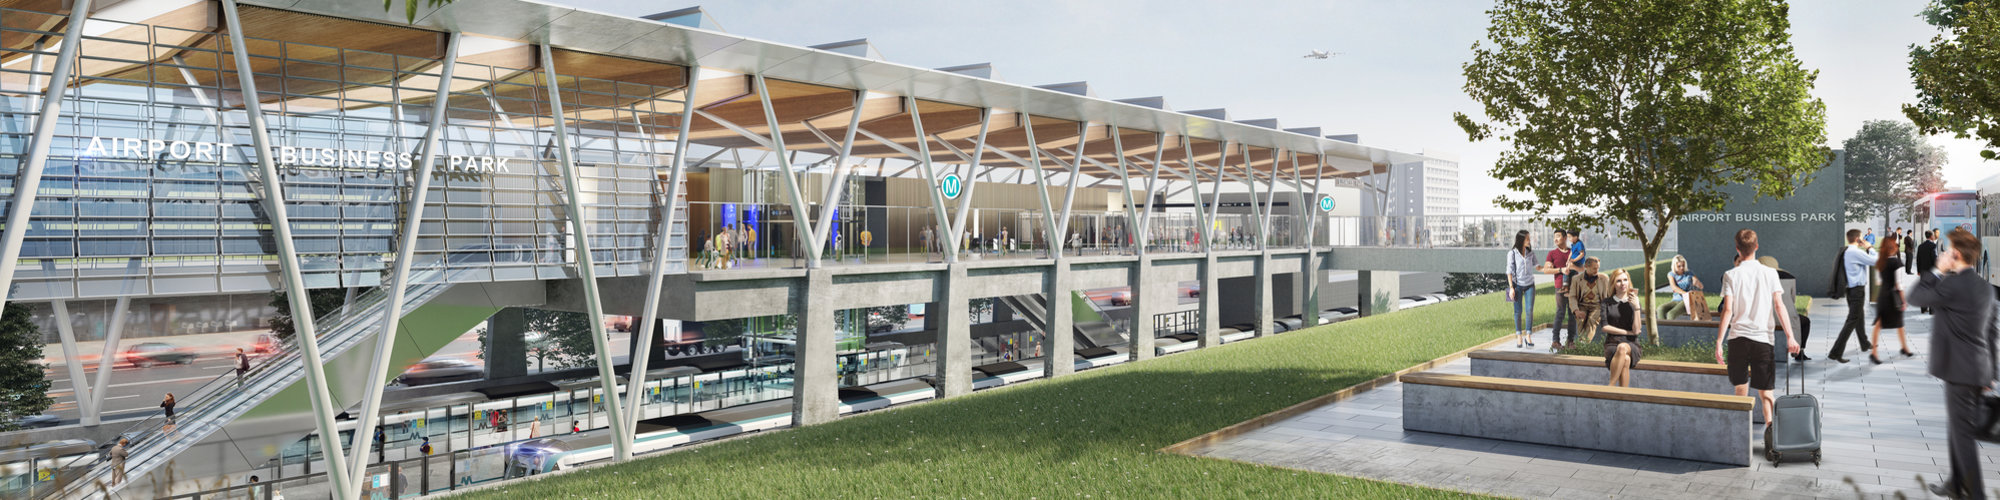 An artist’s impression of Airport Business Park Station, being delivered as part of the Sydney Metro – Western Sydney Airport project. Airport Business Park Station as viewed from the southern side of the station, looking north.